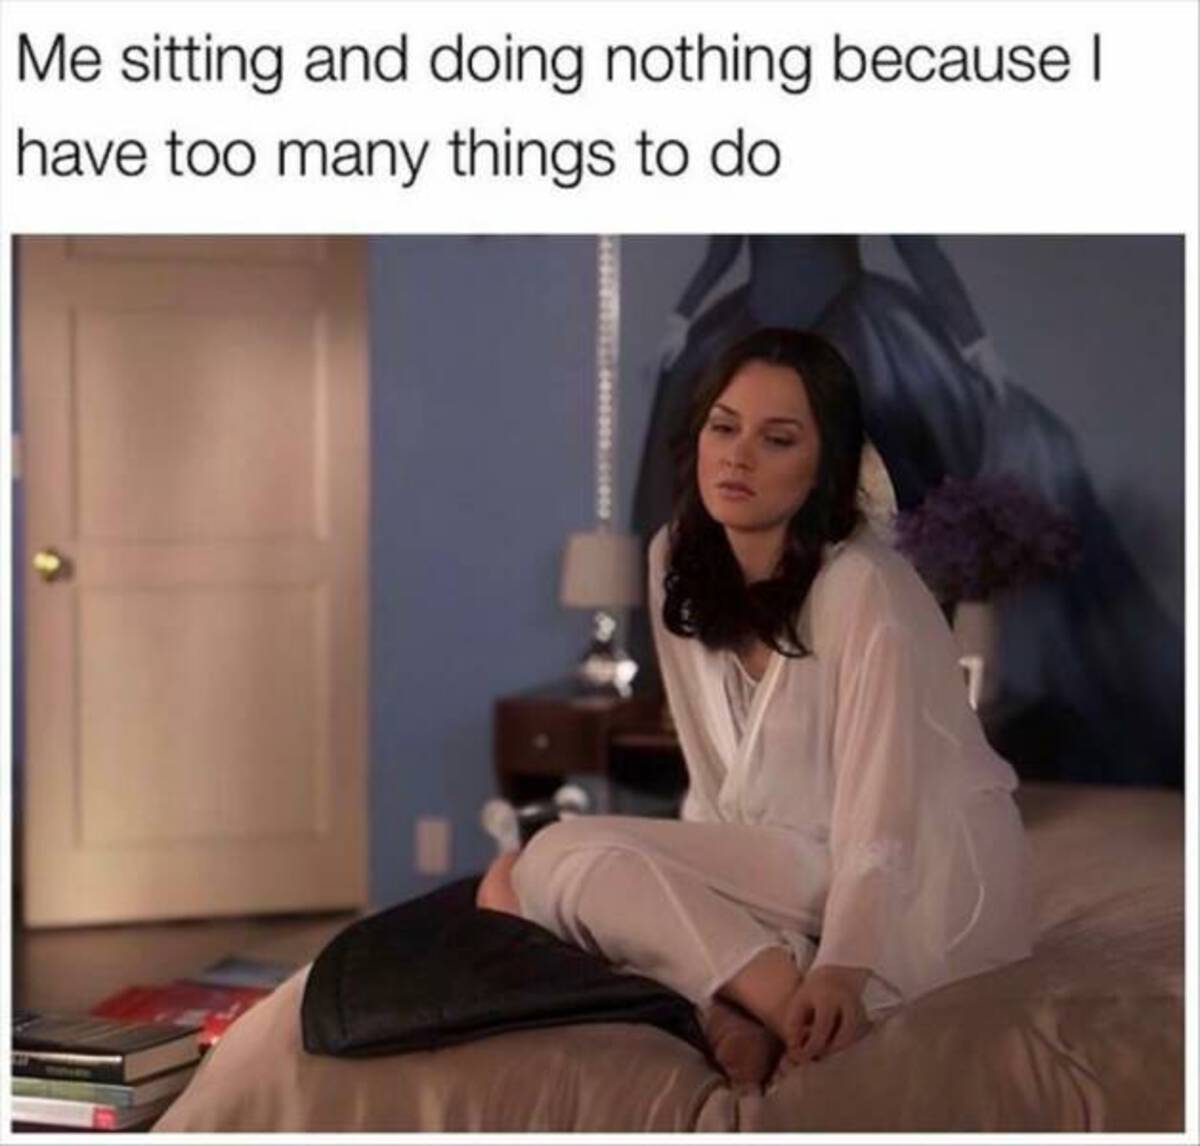 me sitting and doing nothing meme - Me sitting and doing nothing because I have too many things to do